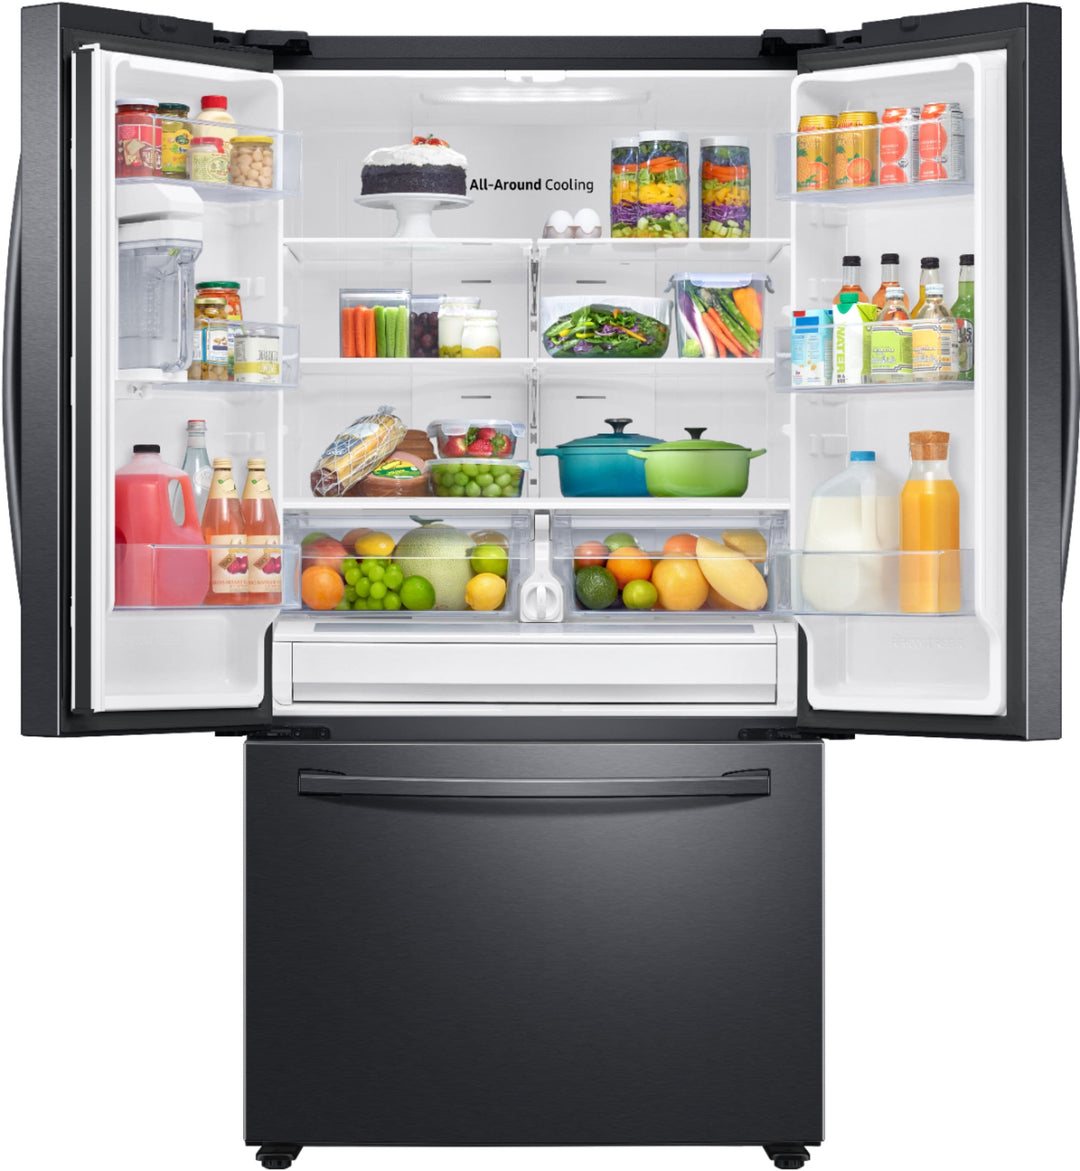 Samsung - 28 cu. ft. Large Capacity 3-Door French Door Refrigerator with AutoFill Water Pitcher - Black stainless steel_8